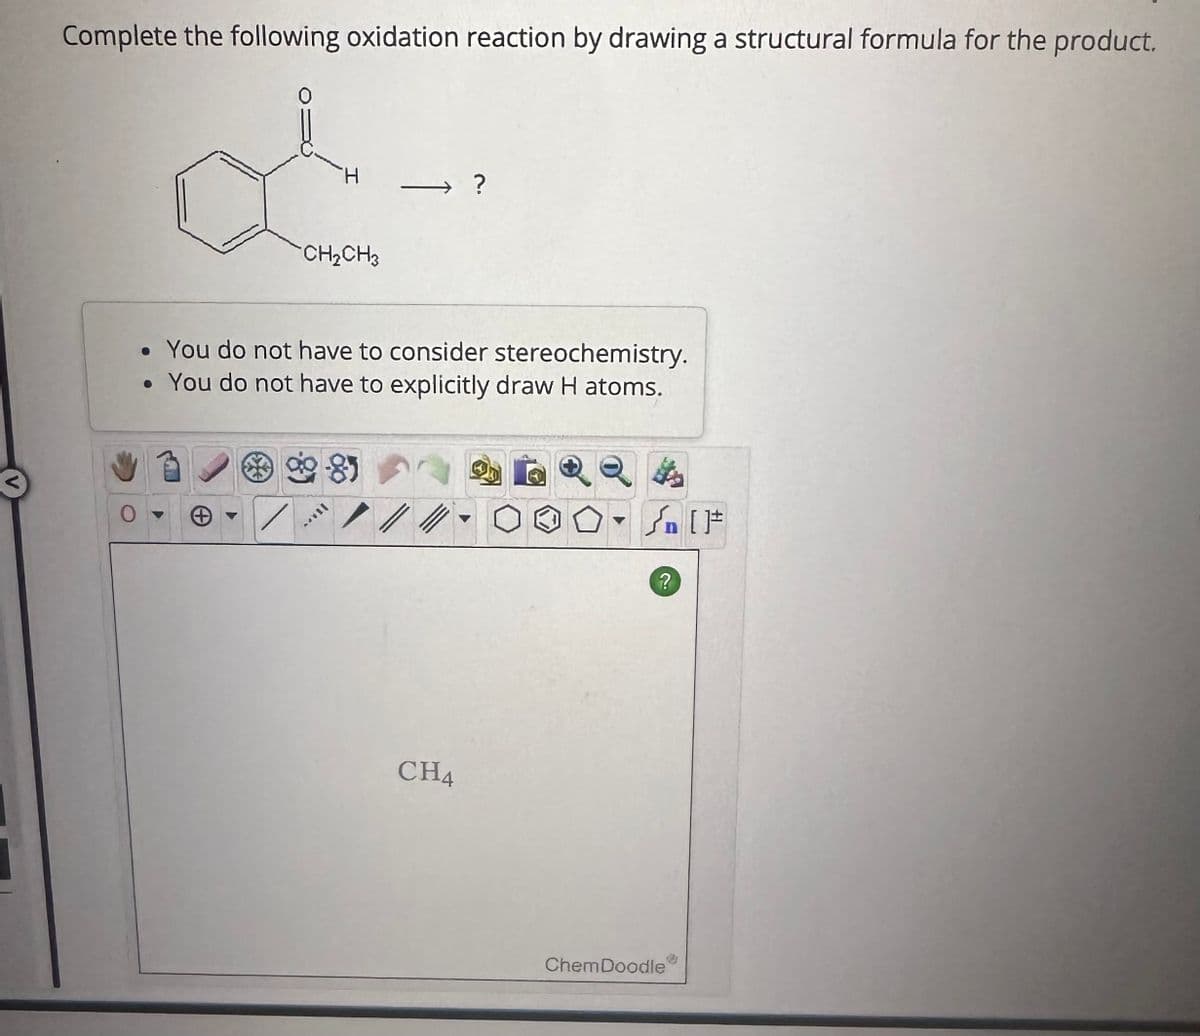 Complete the following oxidation reaction by drawing a structural formula for the product.
d
H
CH₂CH3
• You do not have to consider stereochemistry.
• You do not have to explicitly draw H atoms.
▶
85
CH4
+[ ] کر
?
ChemDoodle